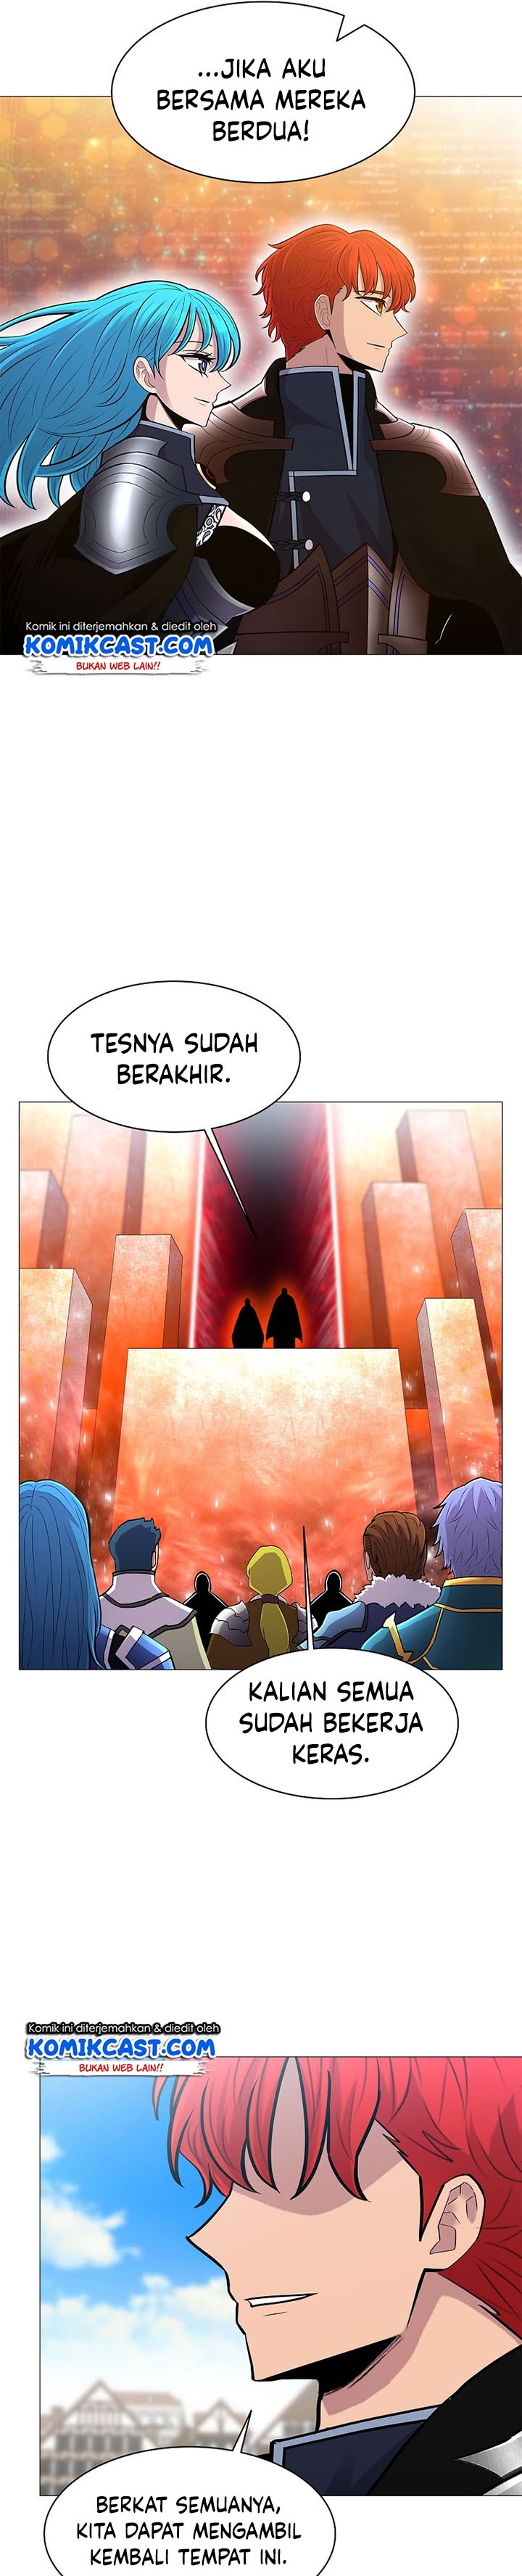 Updater Chapter 73 - 191